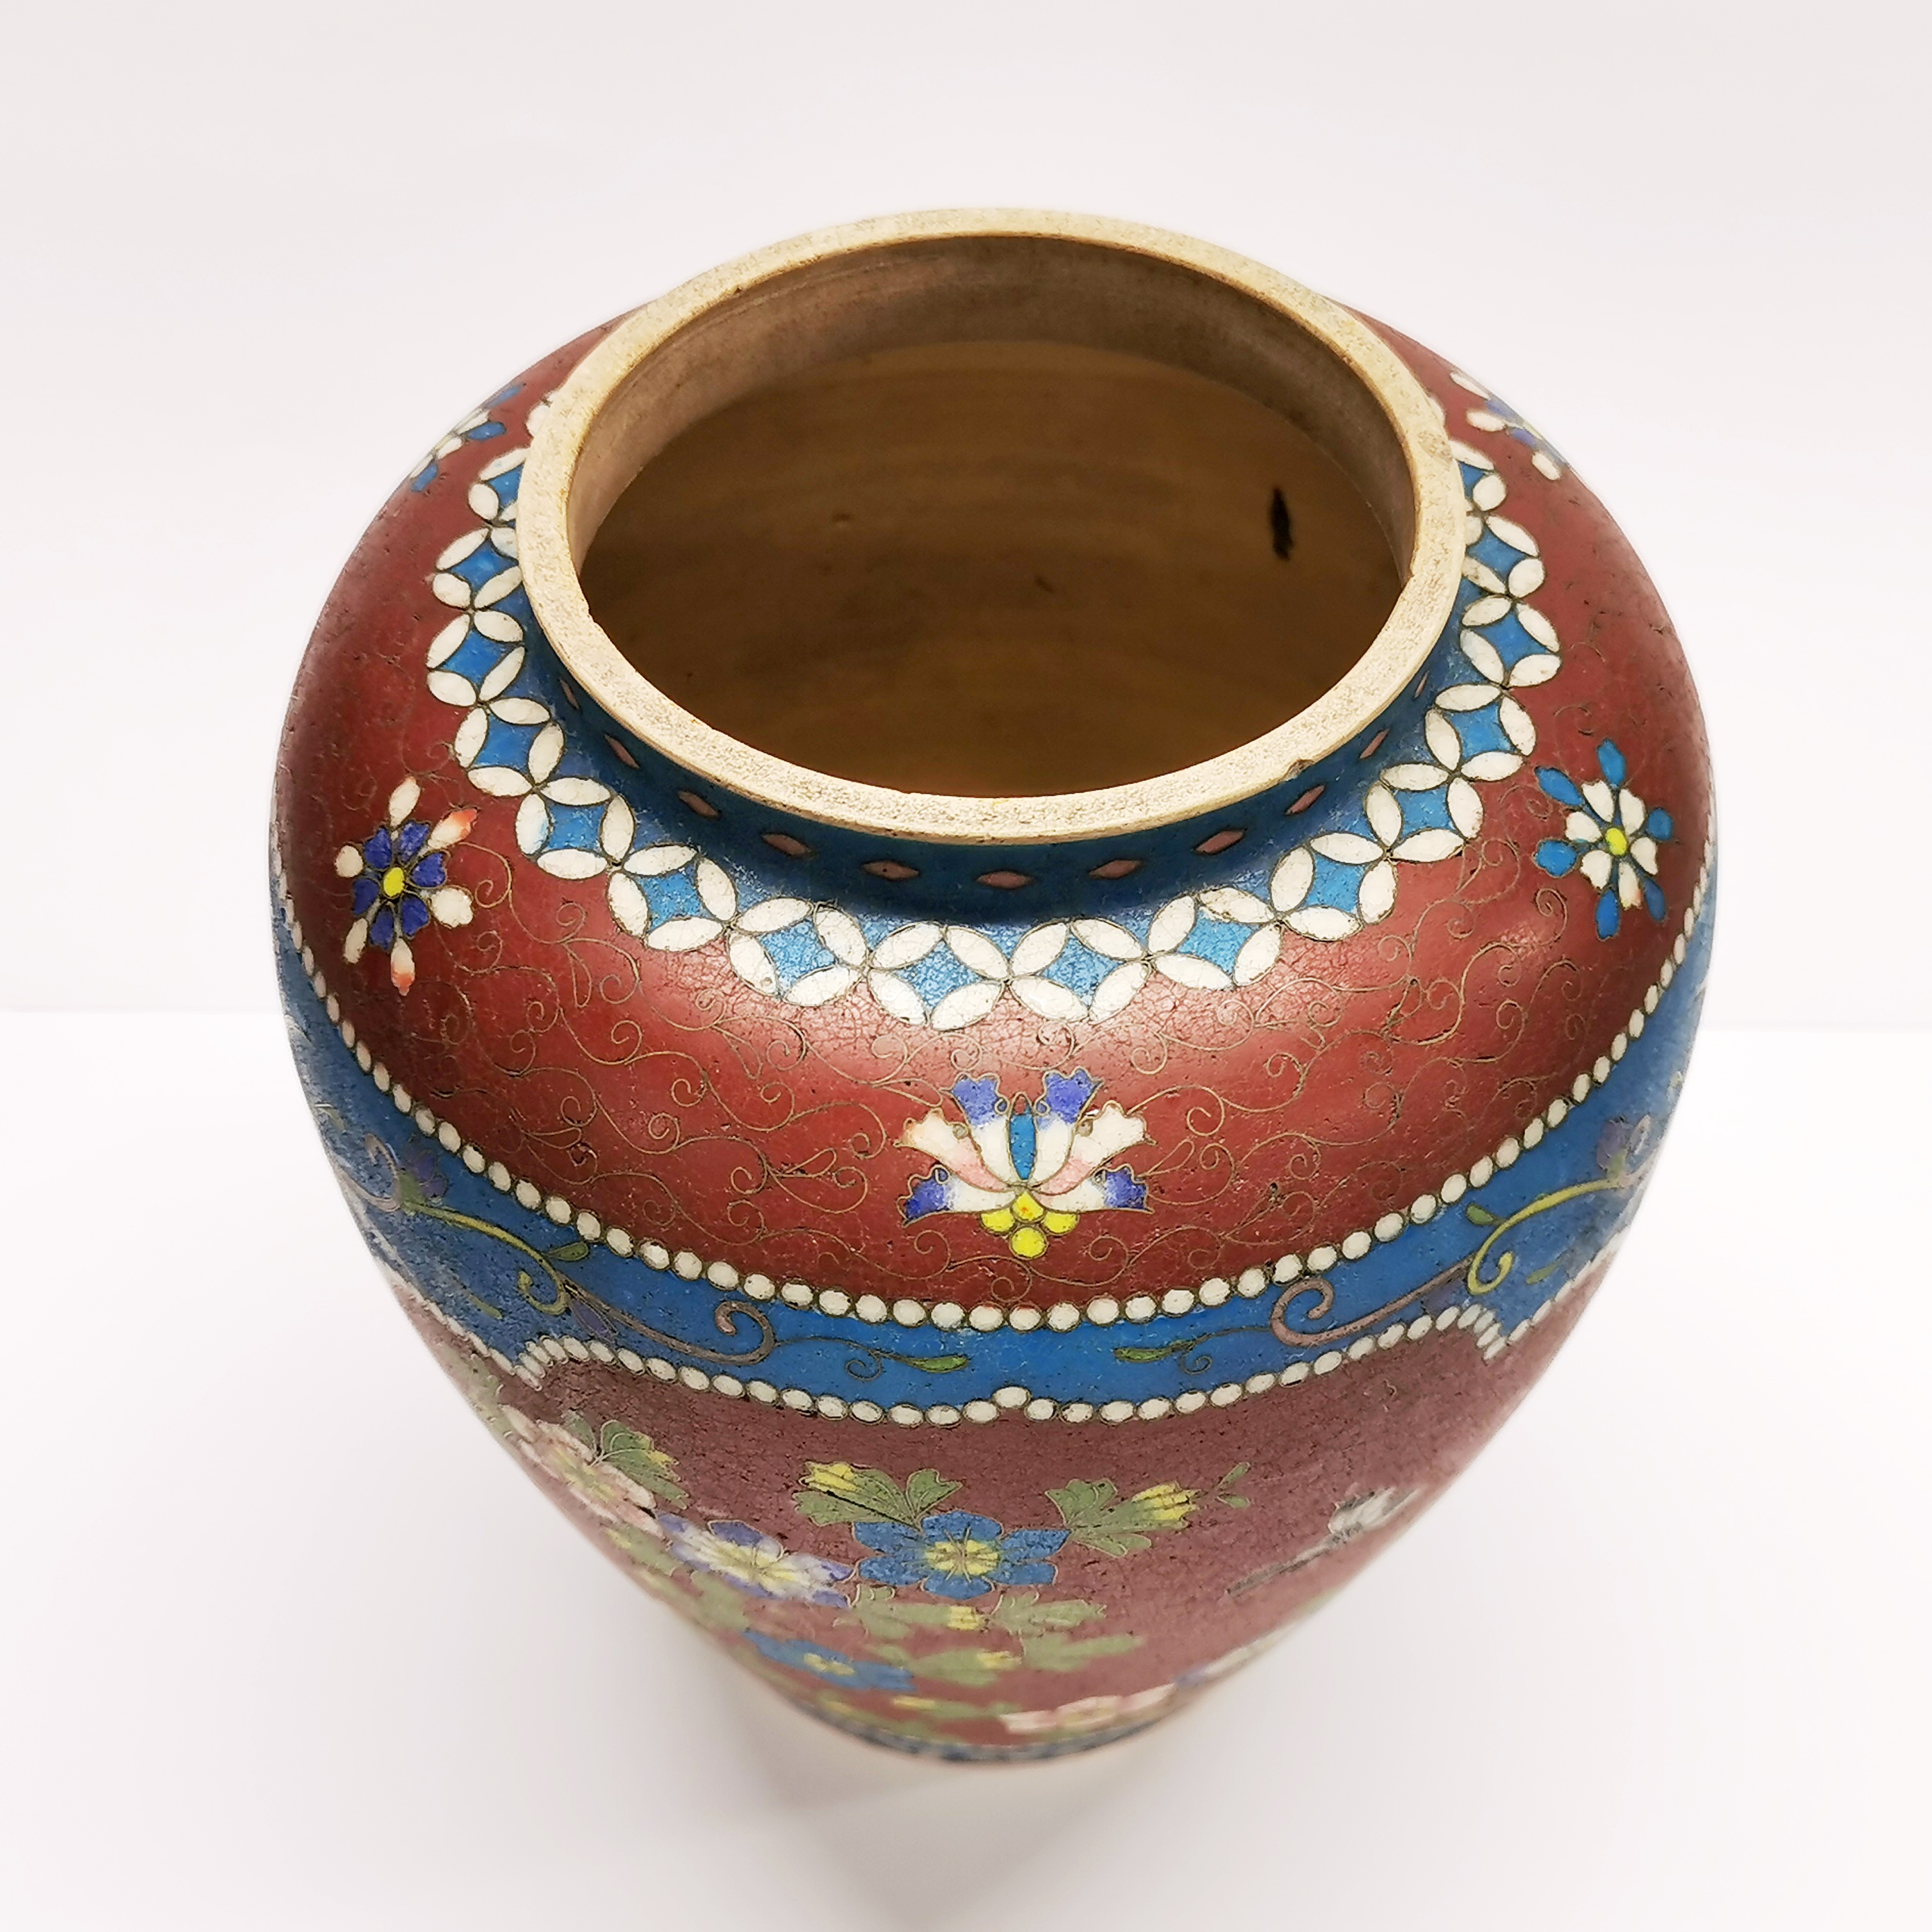 An unusual early 20th century Chinese cloisonne on ceramic vase, H. 22cm. - Image 2 of 4